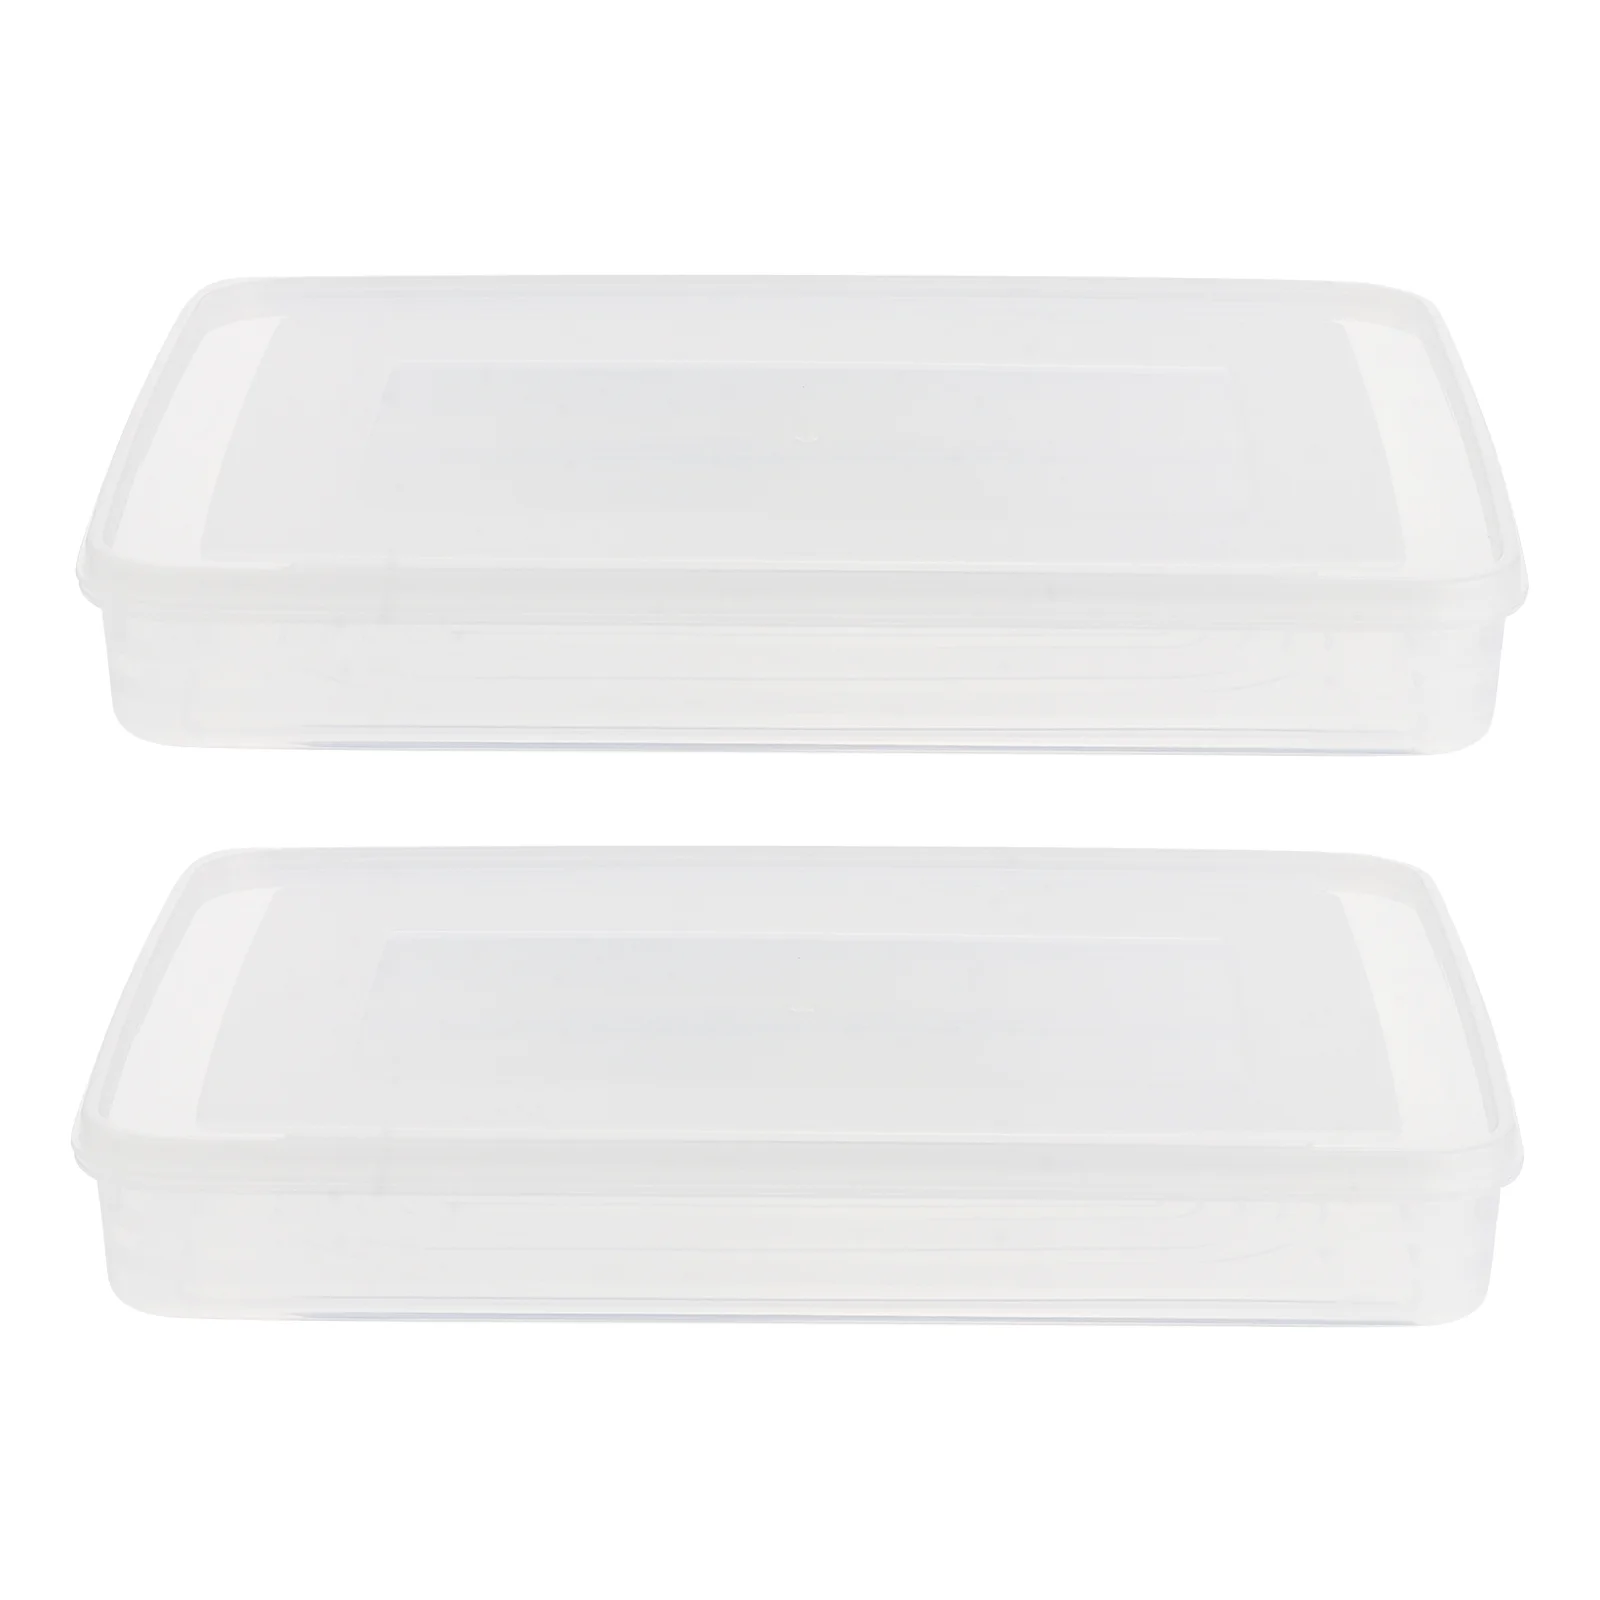 

Storage Food Box Kitchen Refrigerator Containers Fridge Organizer Container Bucket Bins Dumpling Sealed Canisters Airtight